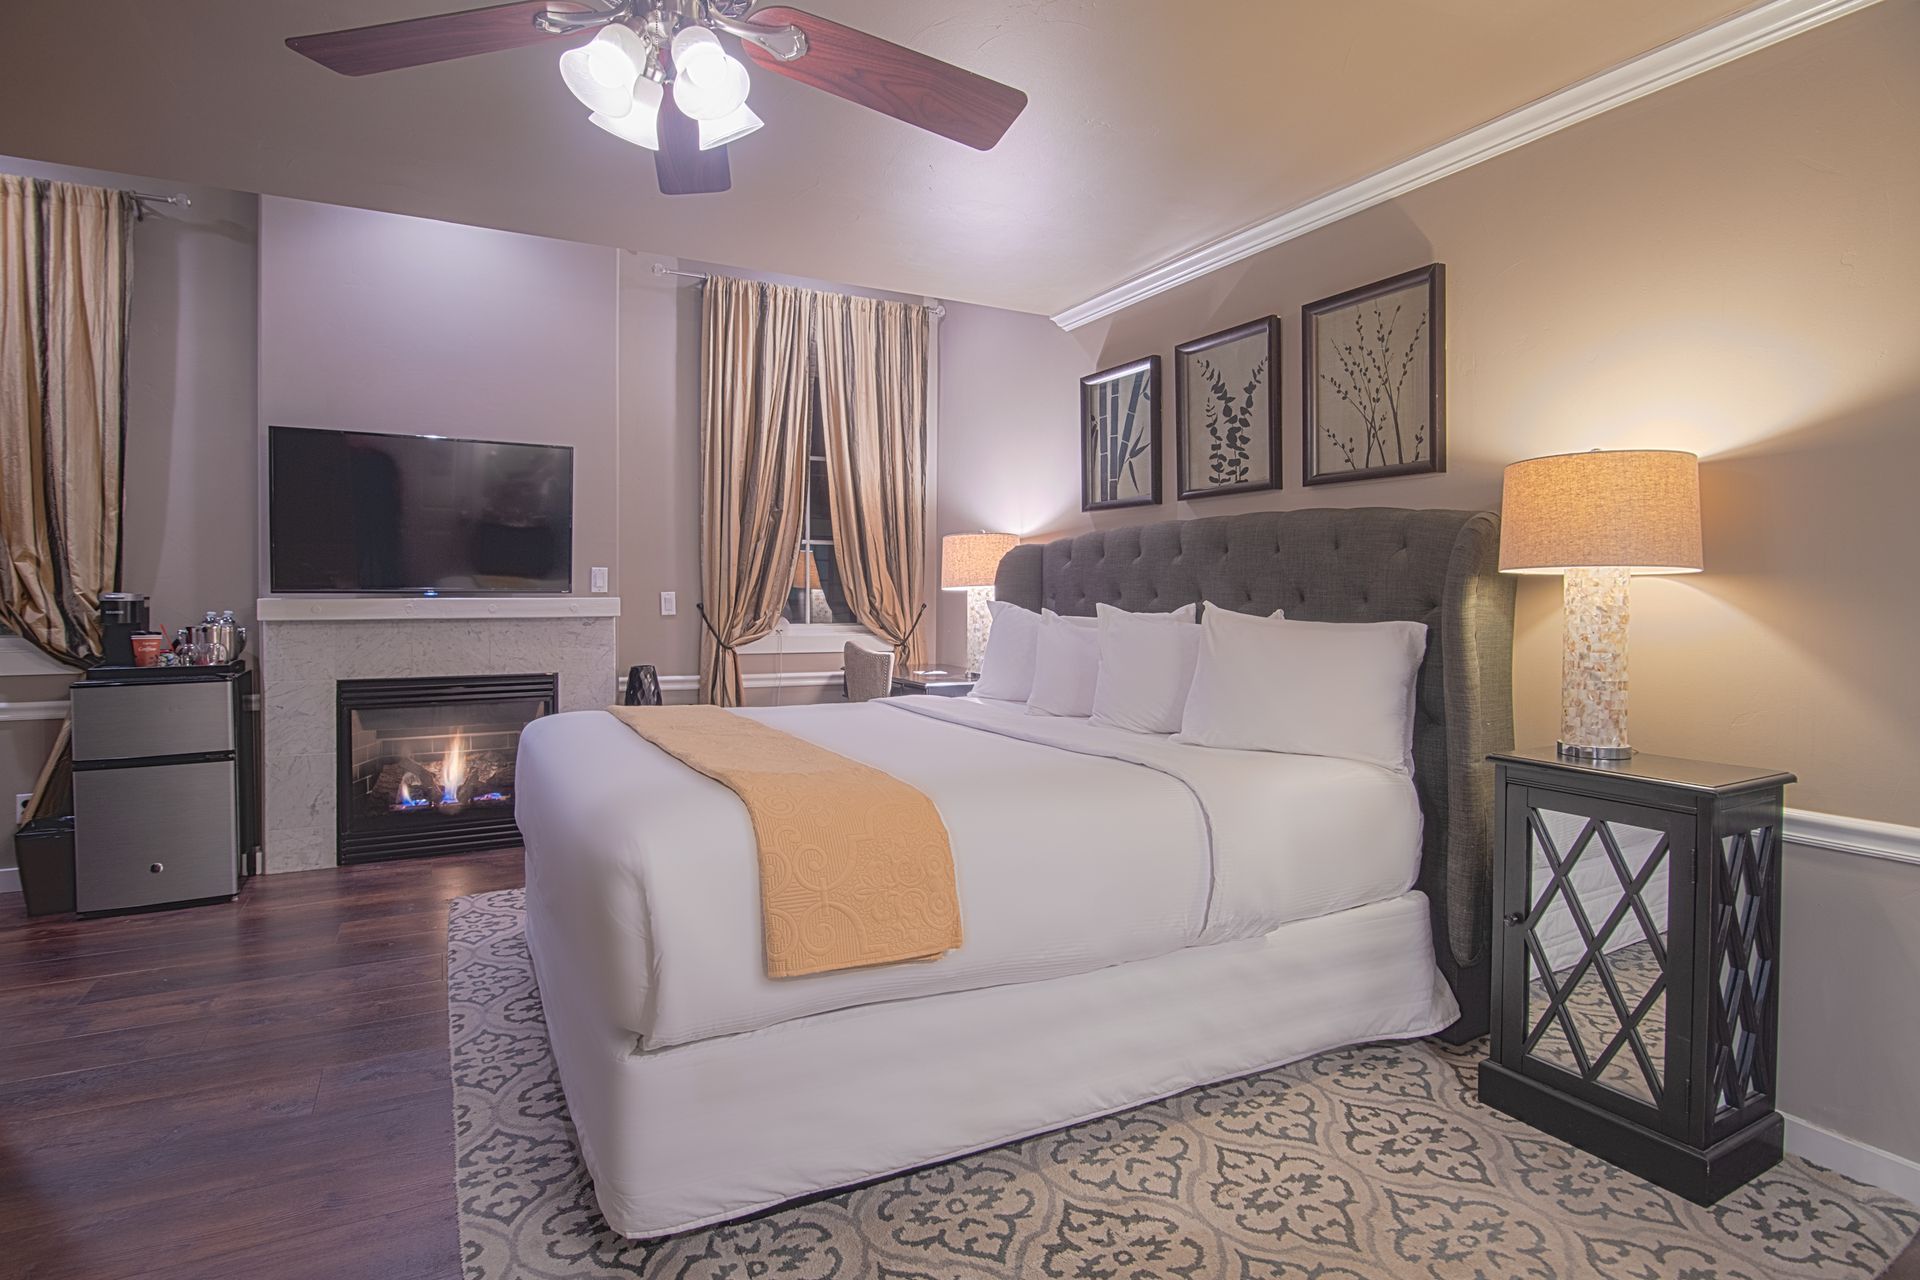 A bedroom with a king size bed , fireplace , television and ceiling fan.